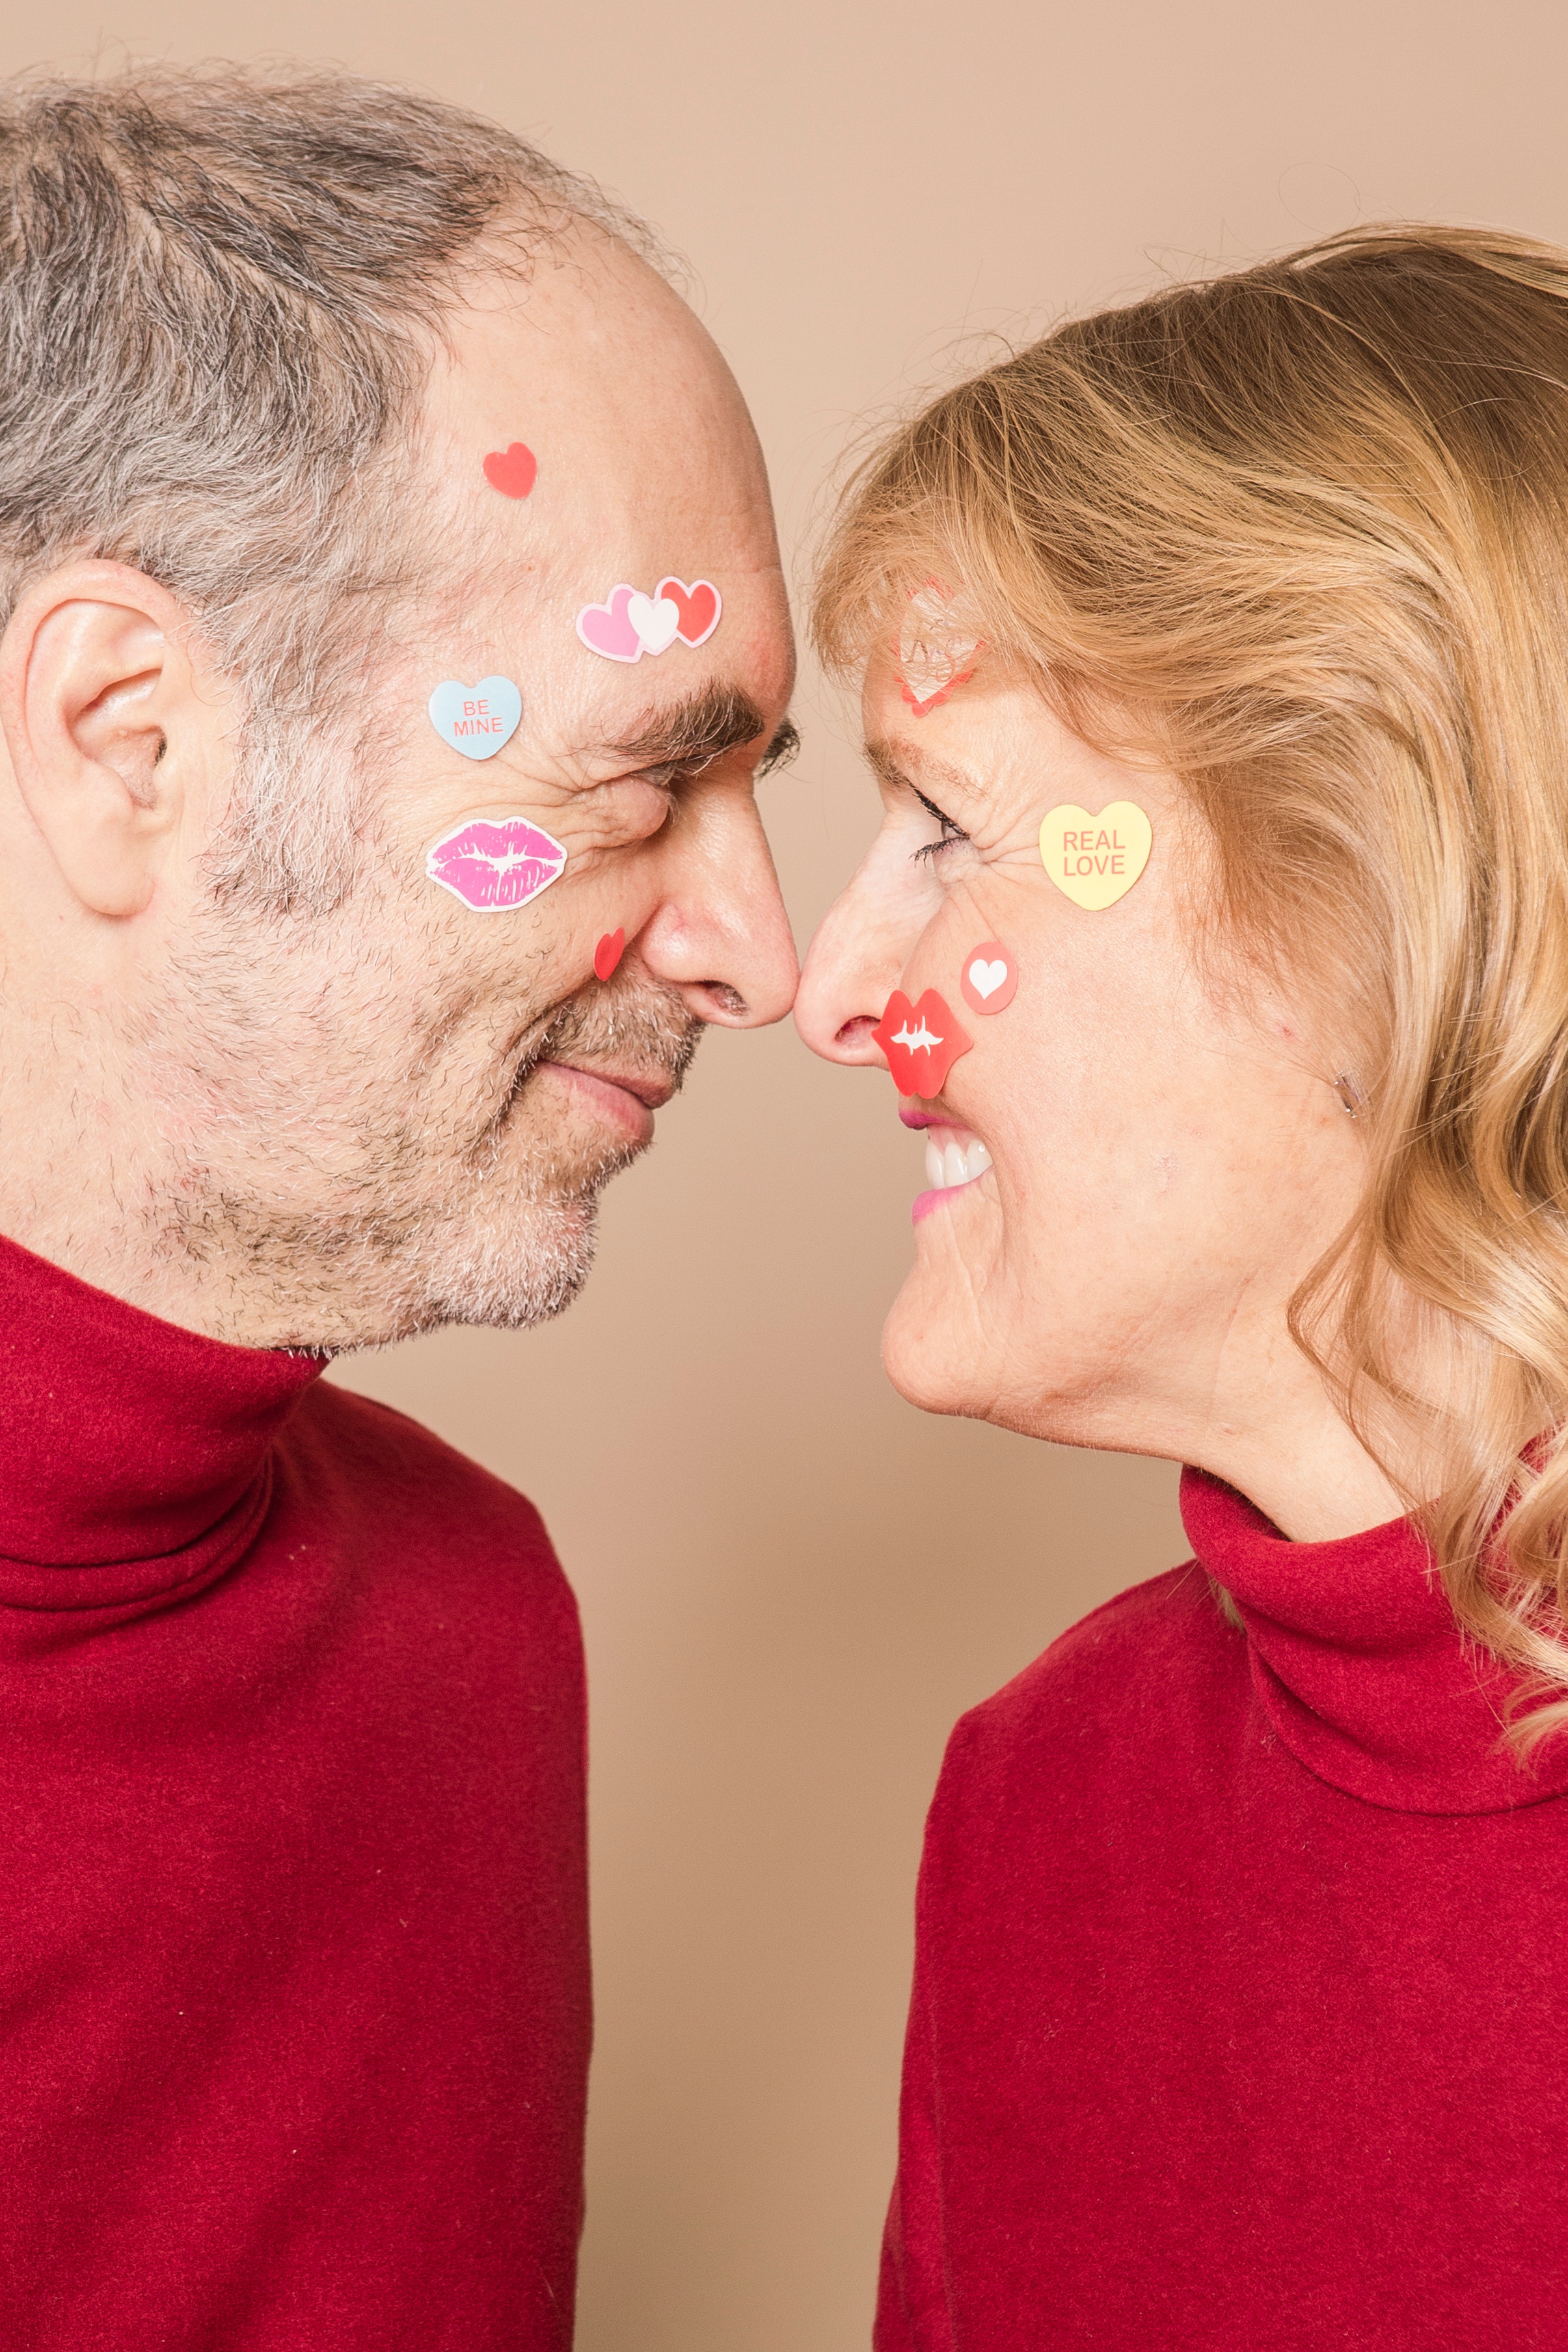 An elderly couple with stickers on their face. | Source: Pexels